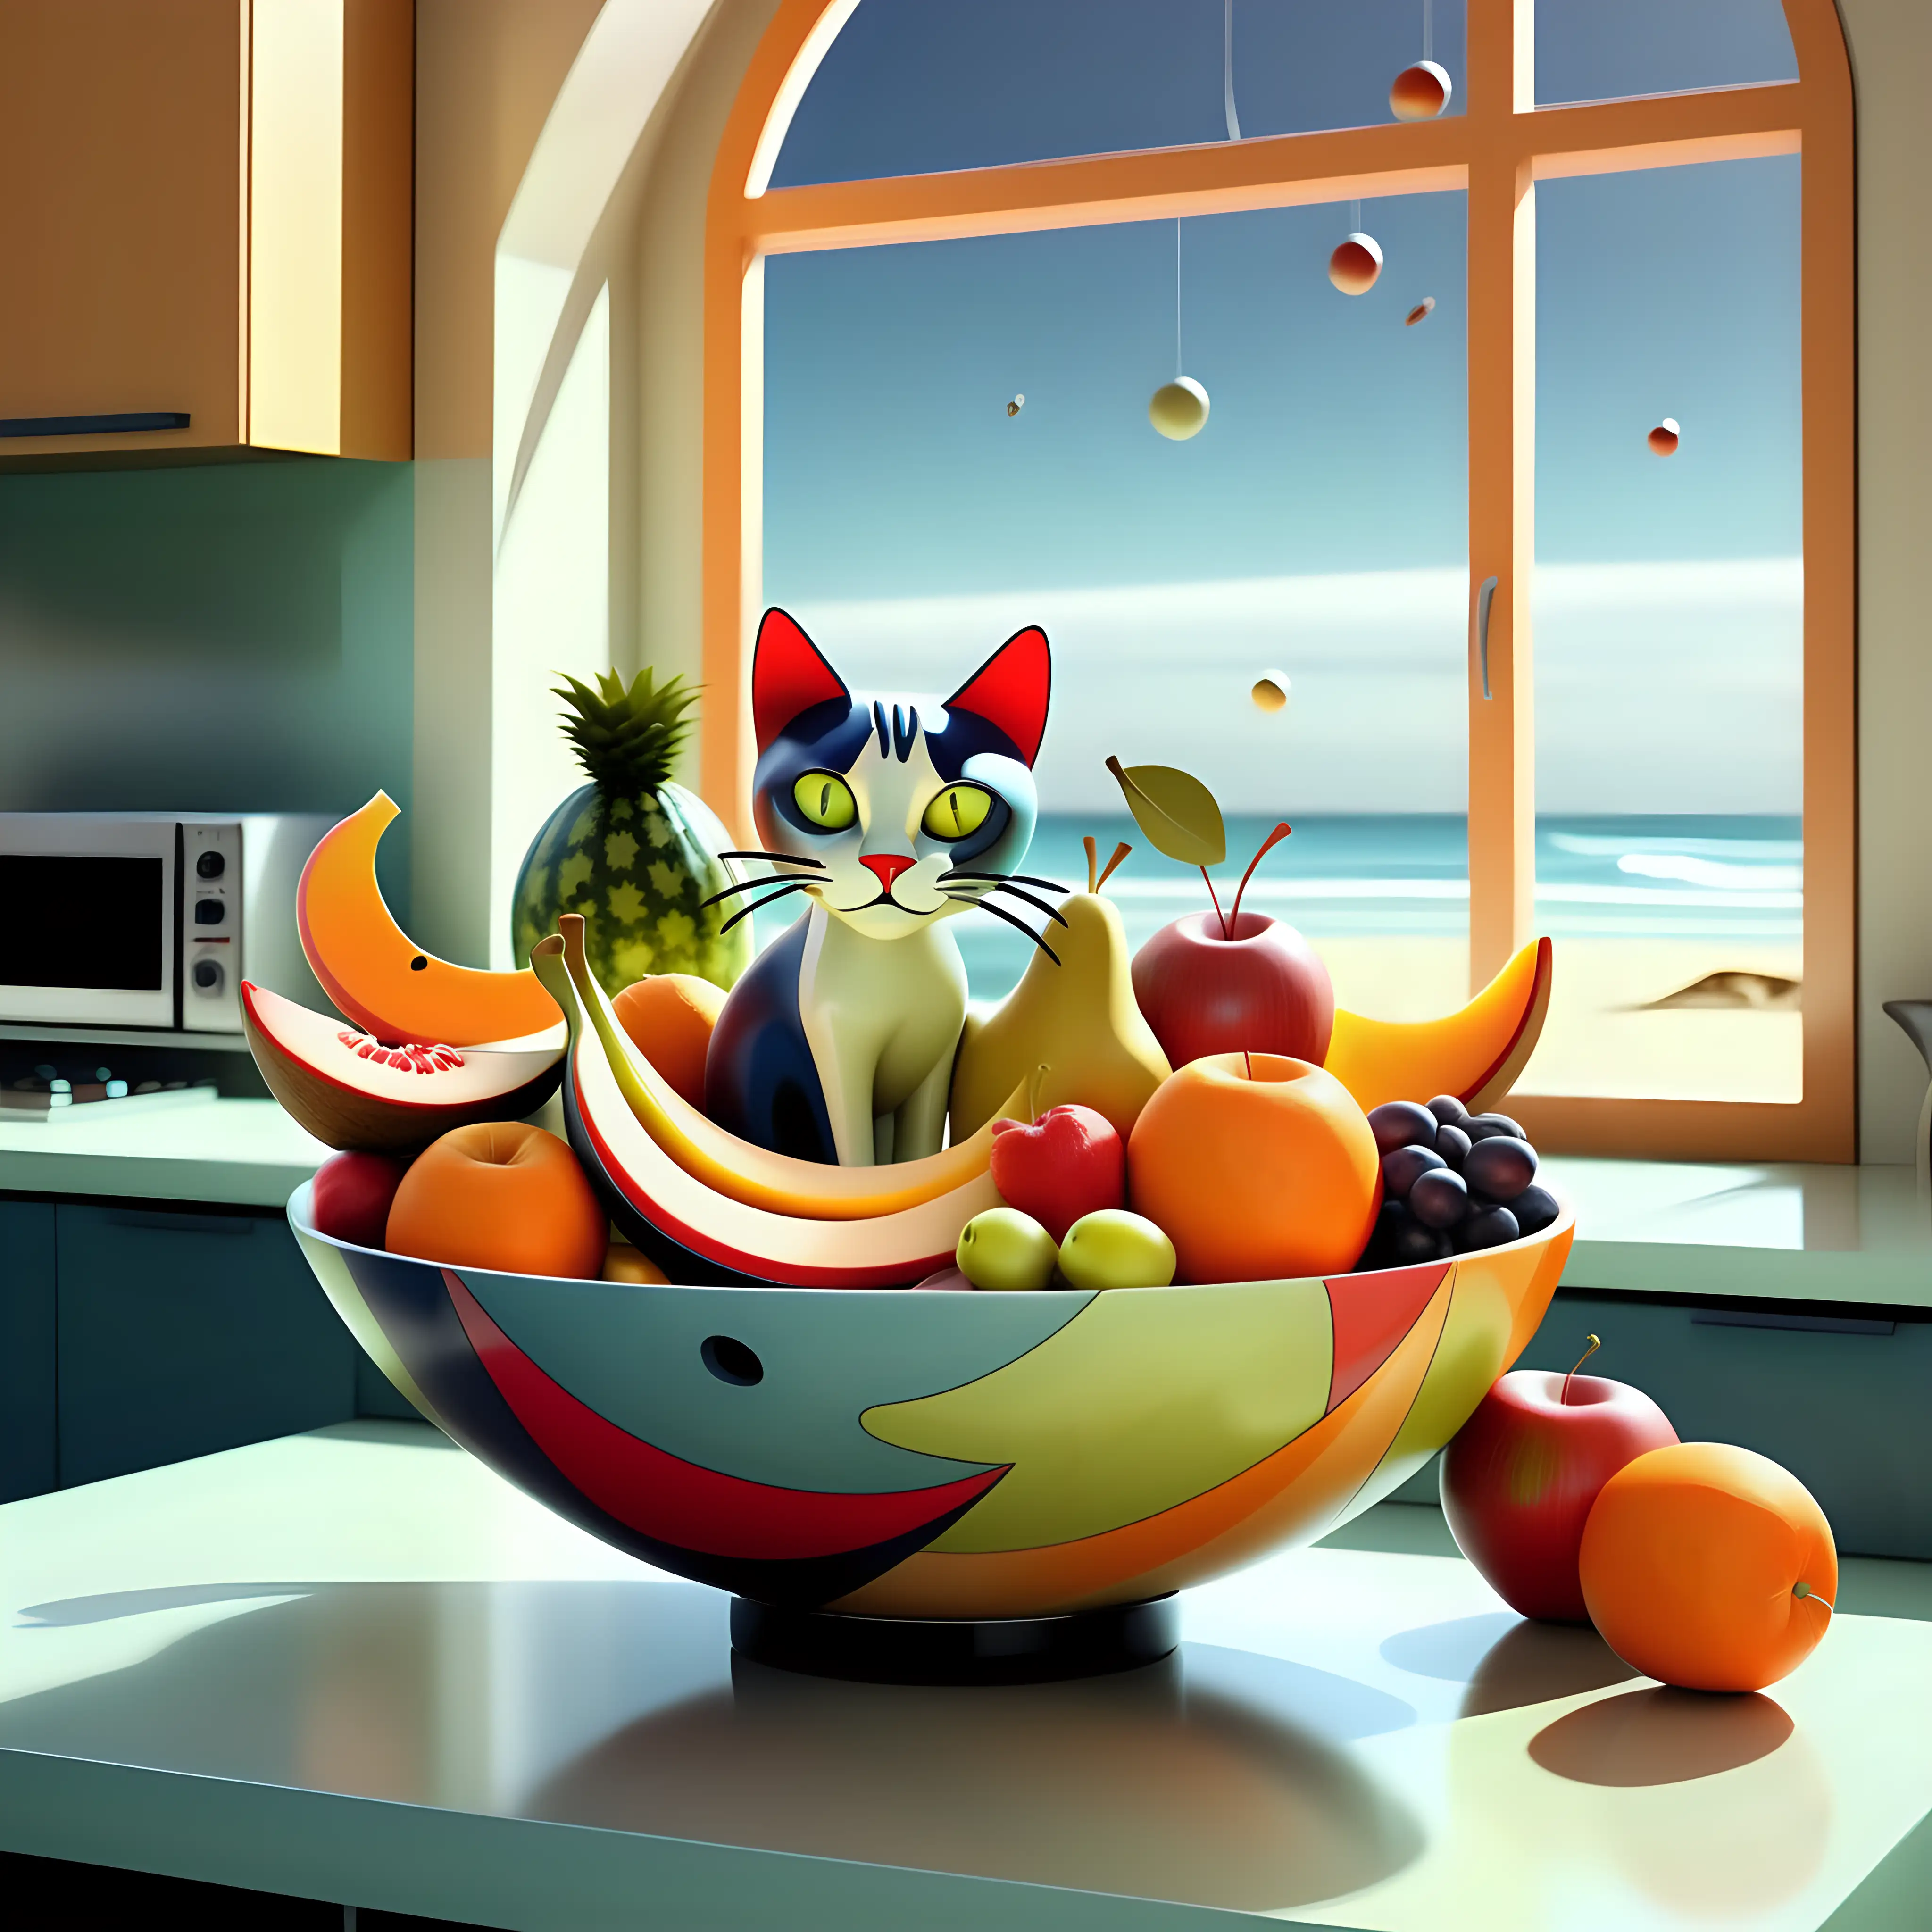 Abstract Surrealistic Bowl of Fruit in Futuristic Kitchen with Playful SpaceAge Cats and Beach View